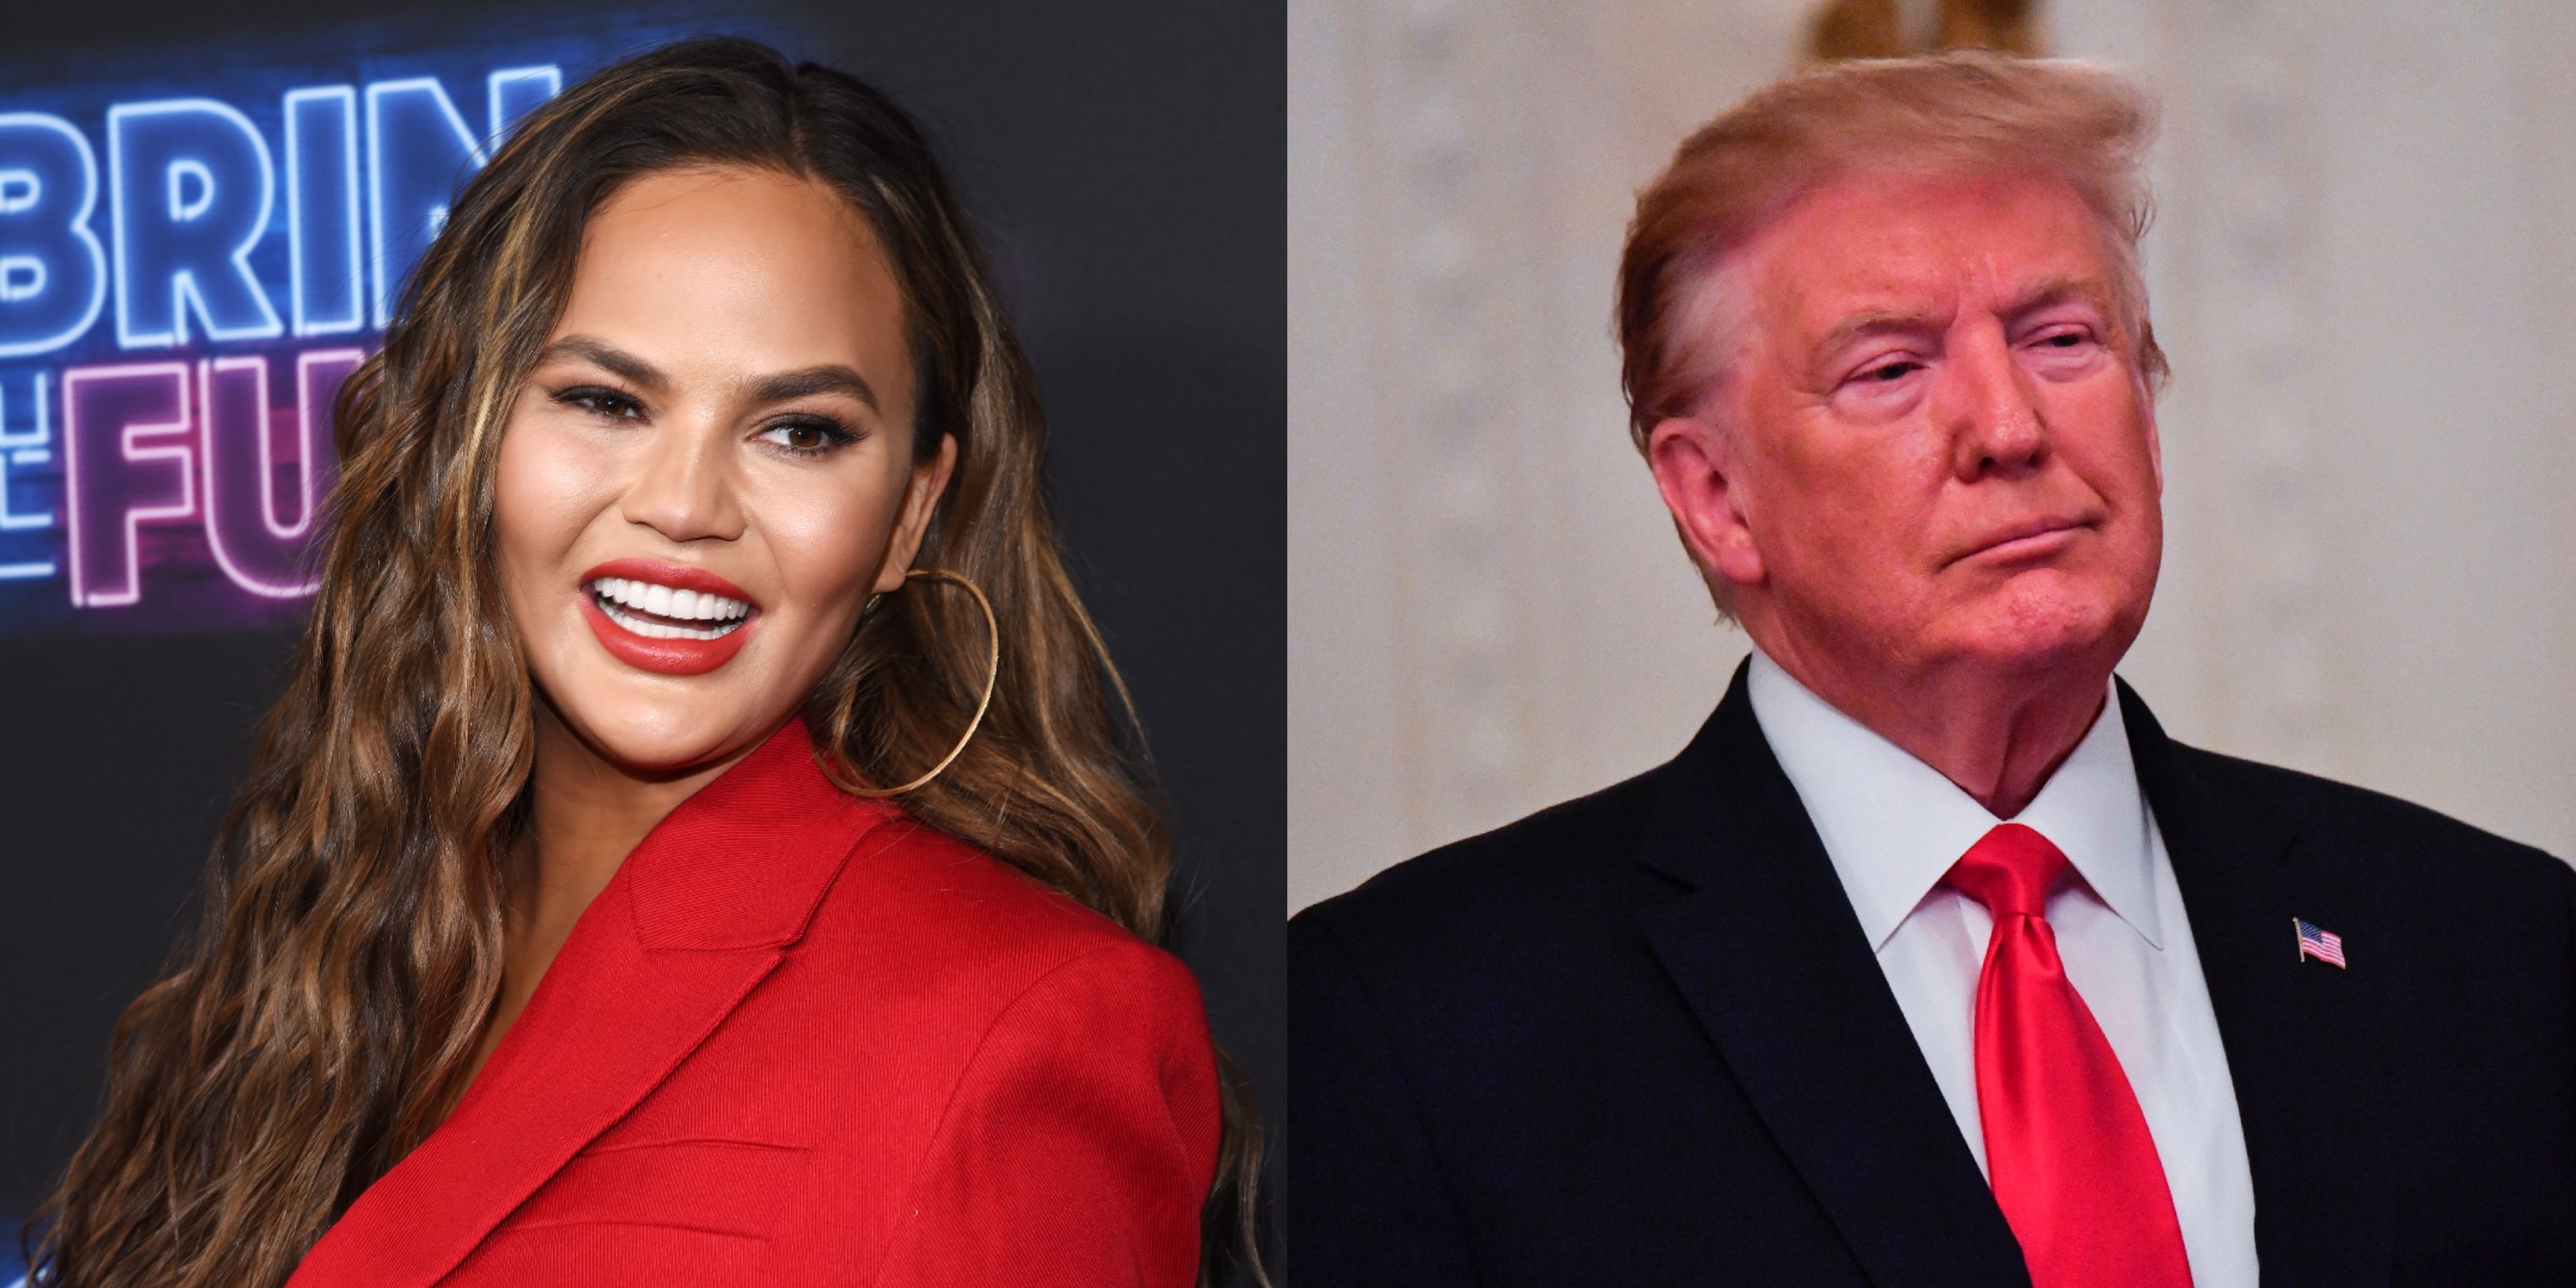 Best Celebrity Social Media Reactions to Chrissy Teigen and Trump's Twitter Fight: 50 Cent, Andy Cohen, and More